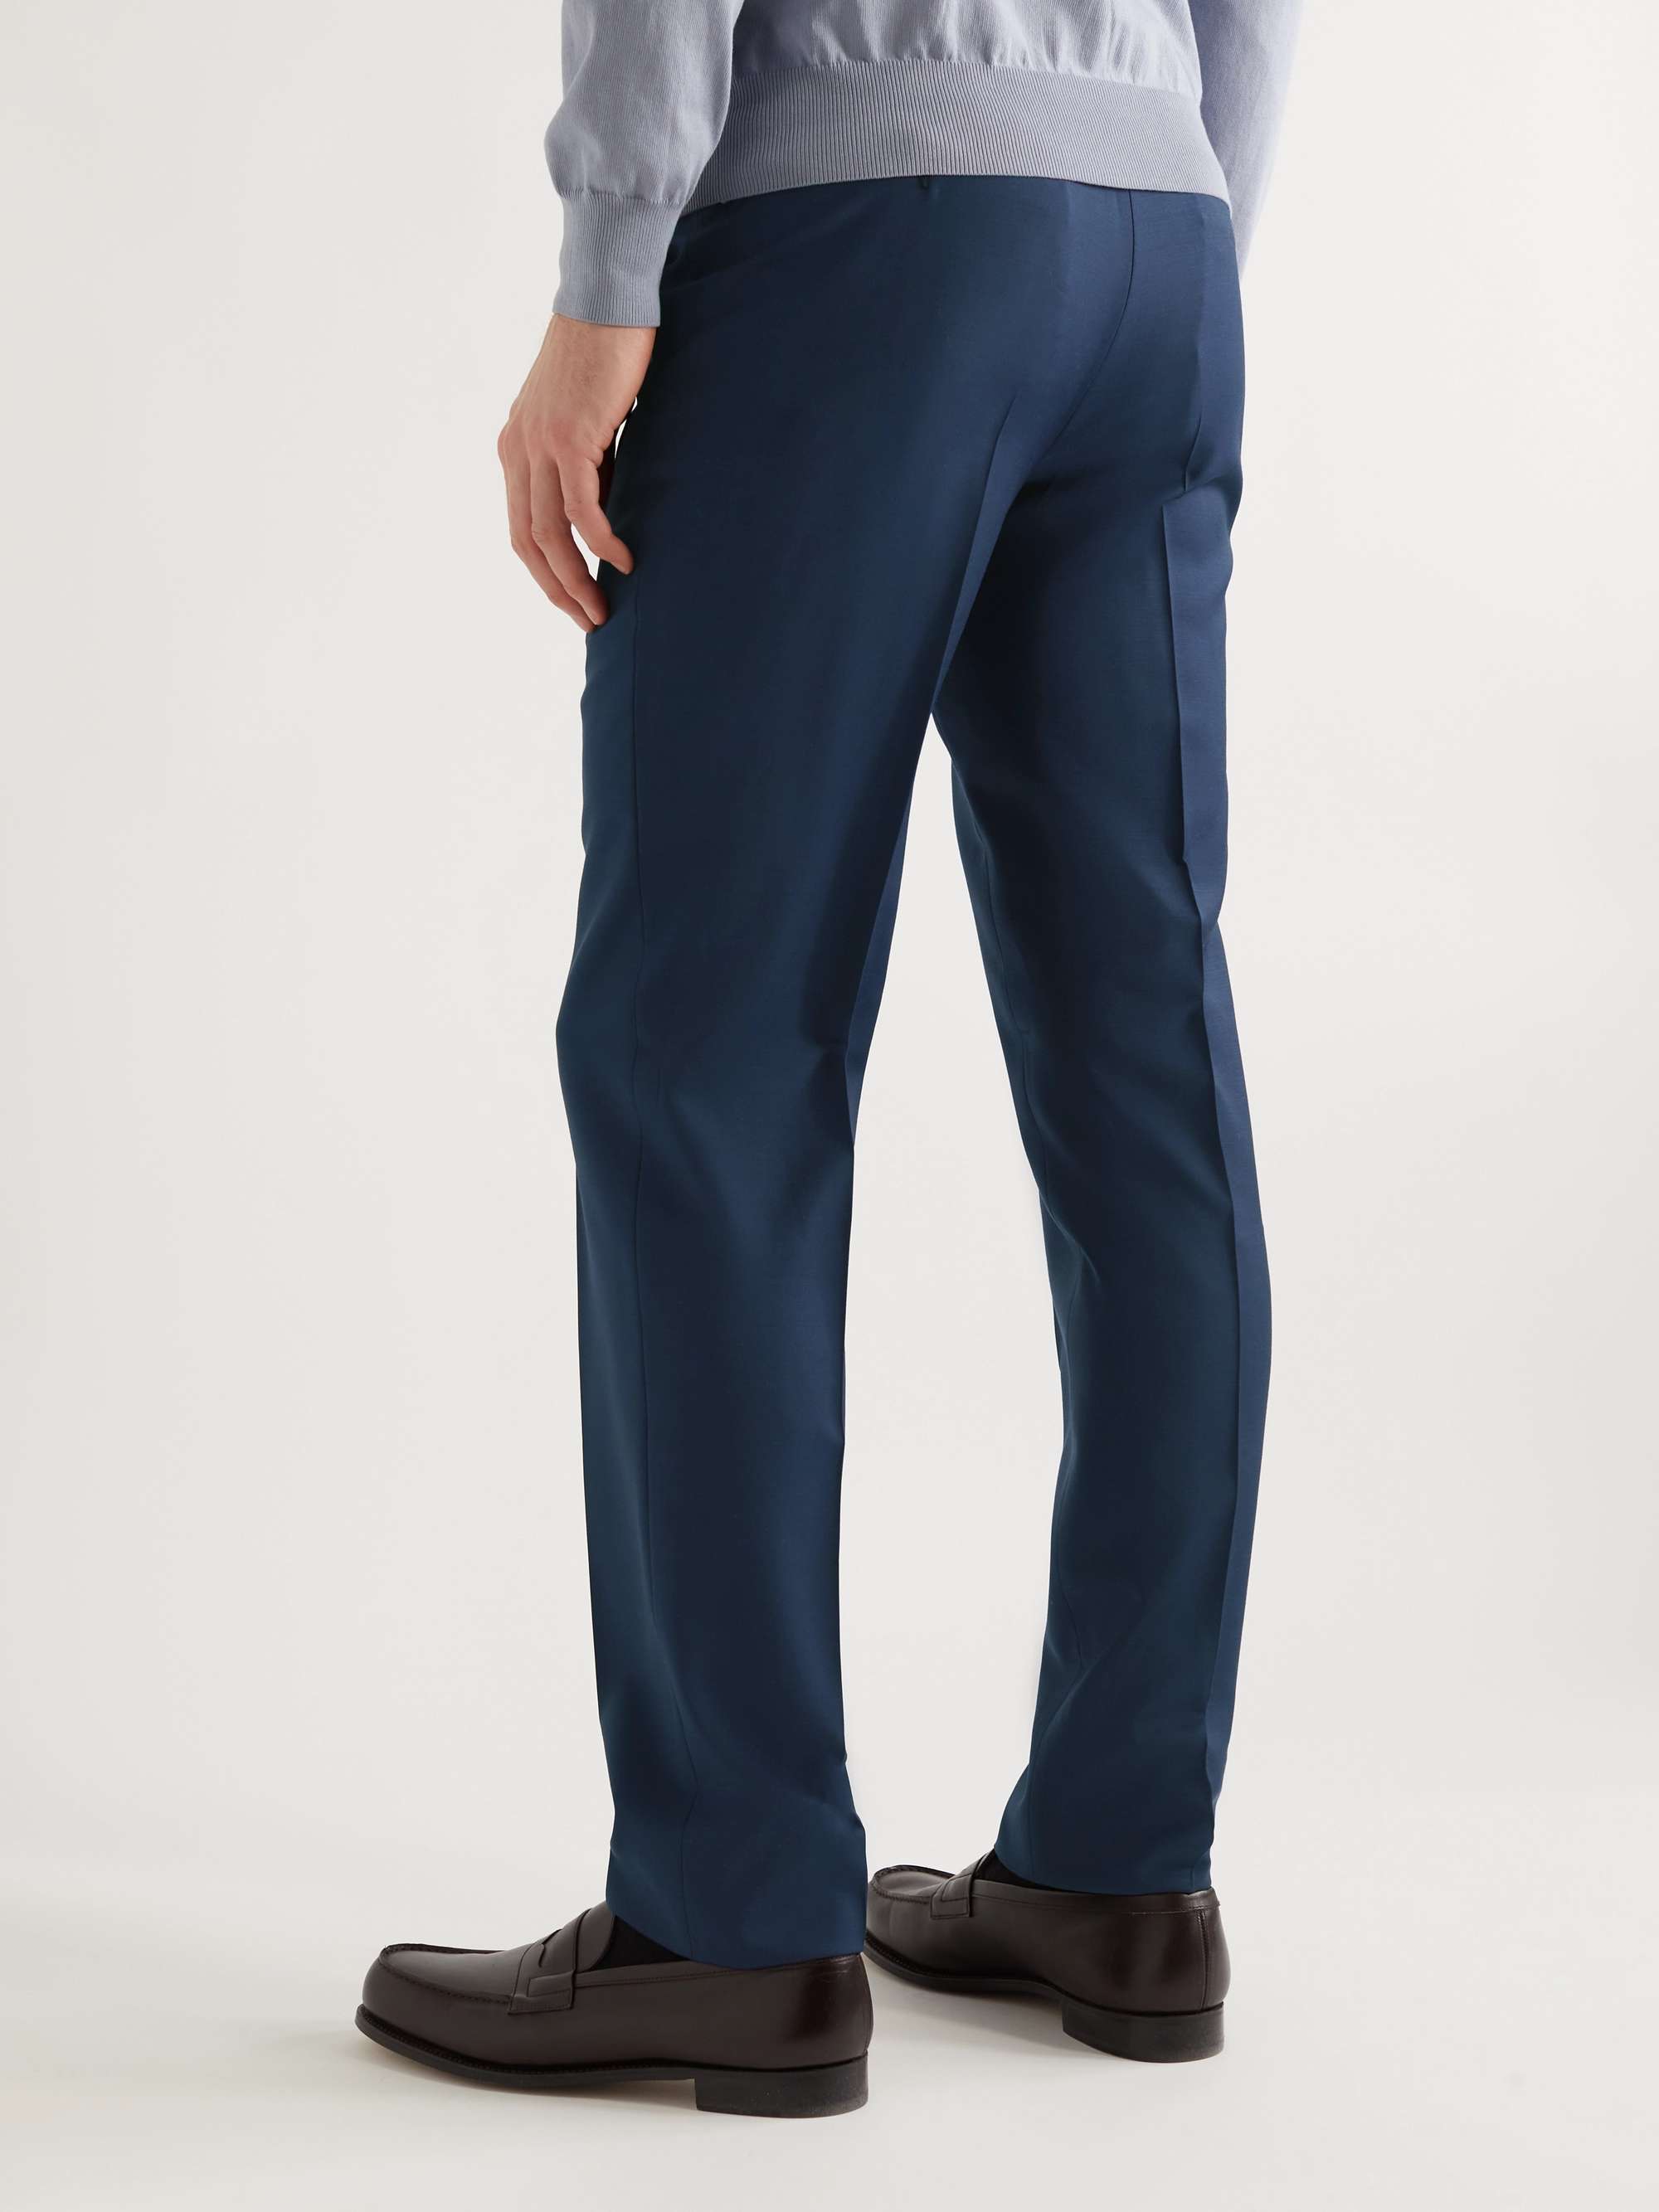 ZEGNA Slim-Fit Tapered Wool Trousers